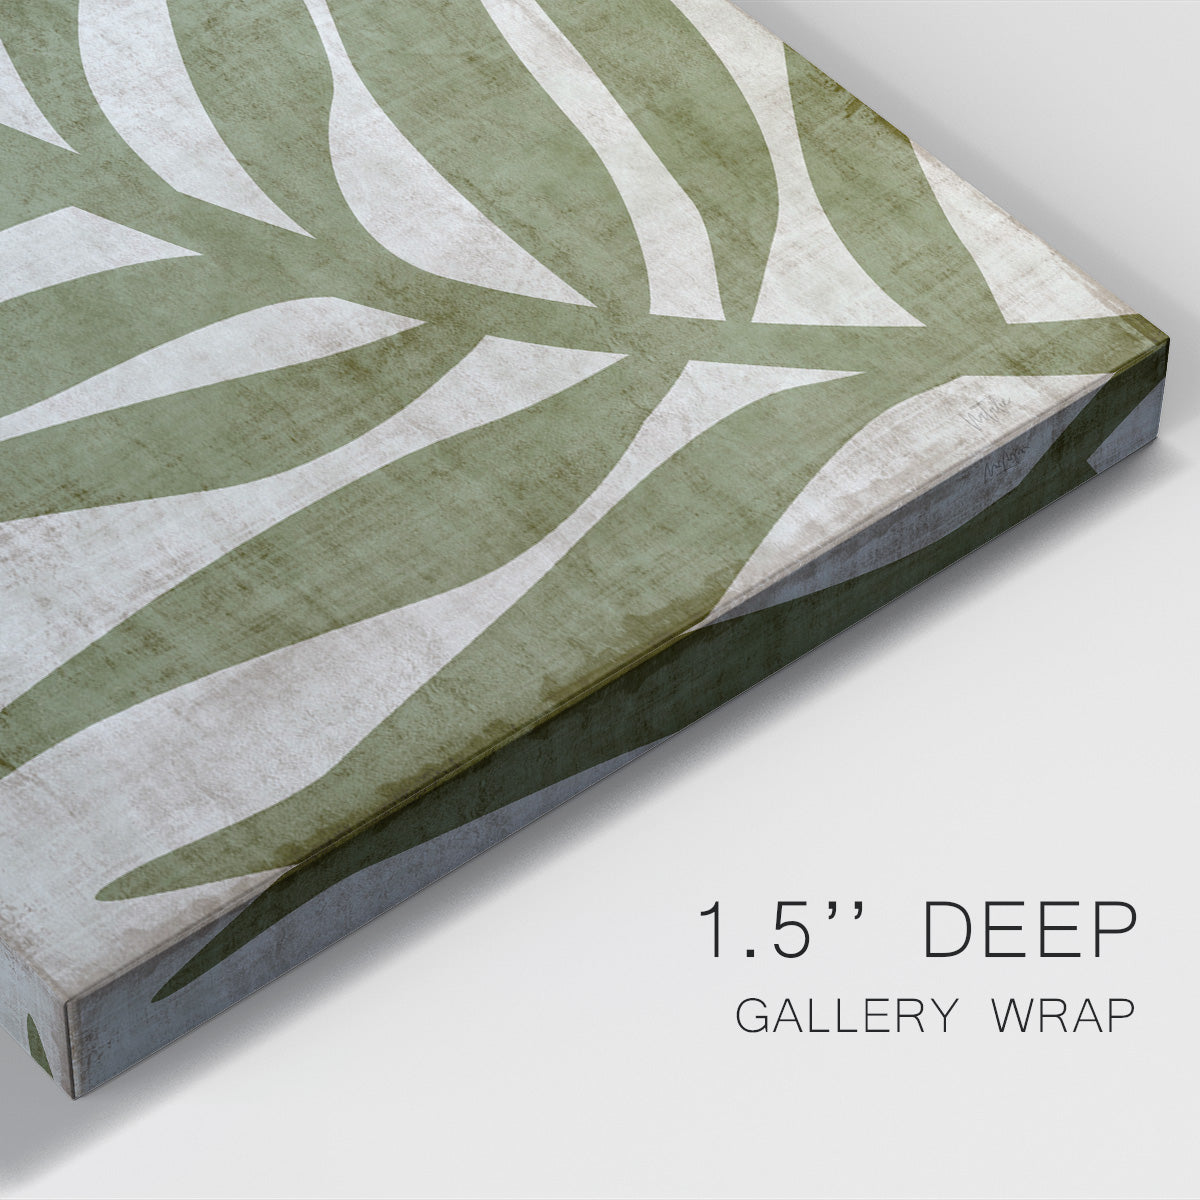 Island Greenery I Premium Gallery Wrapped Canvas - Ready to Hang